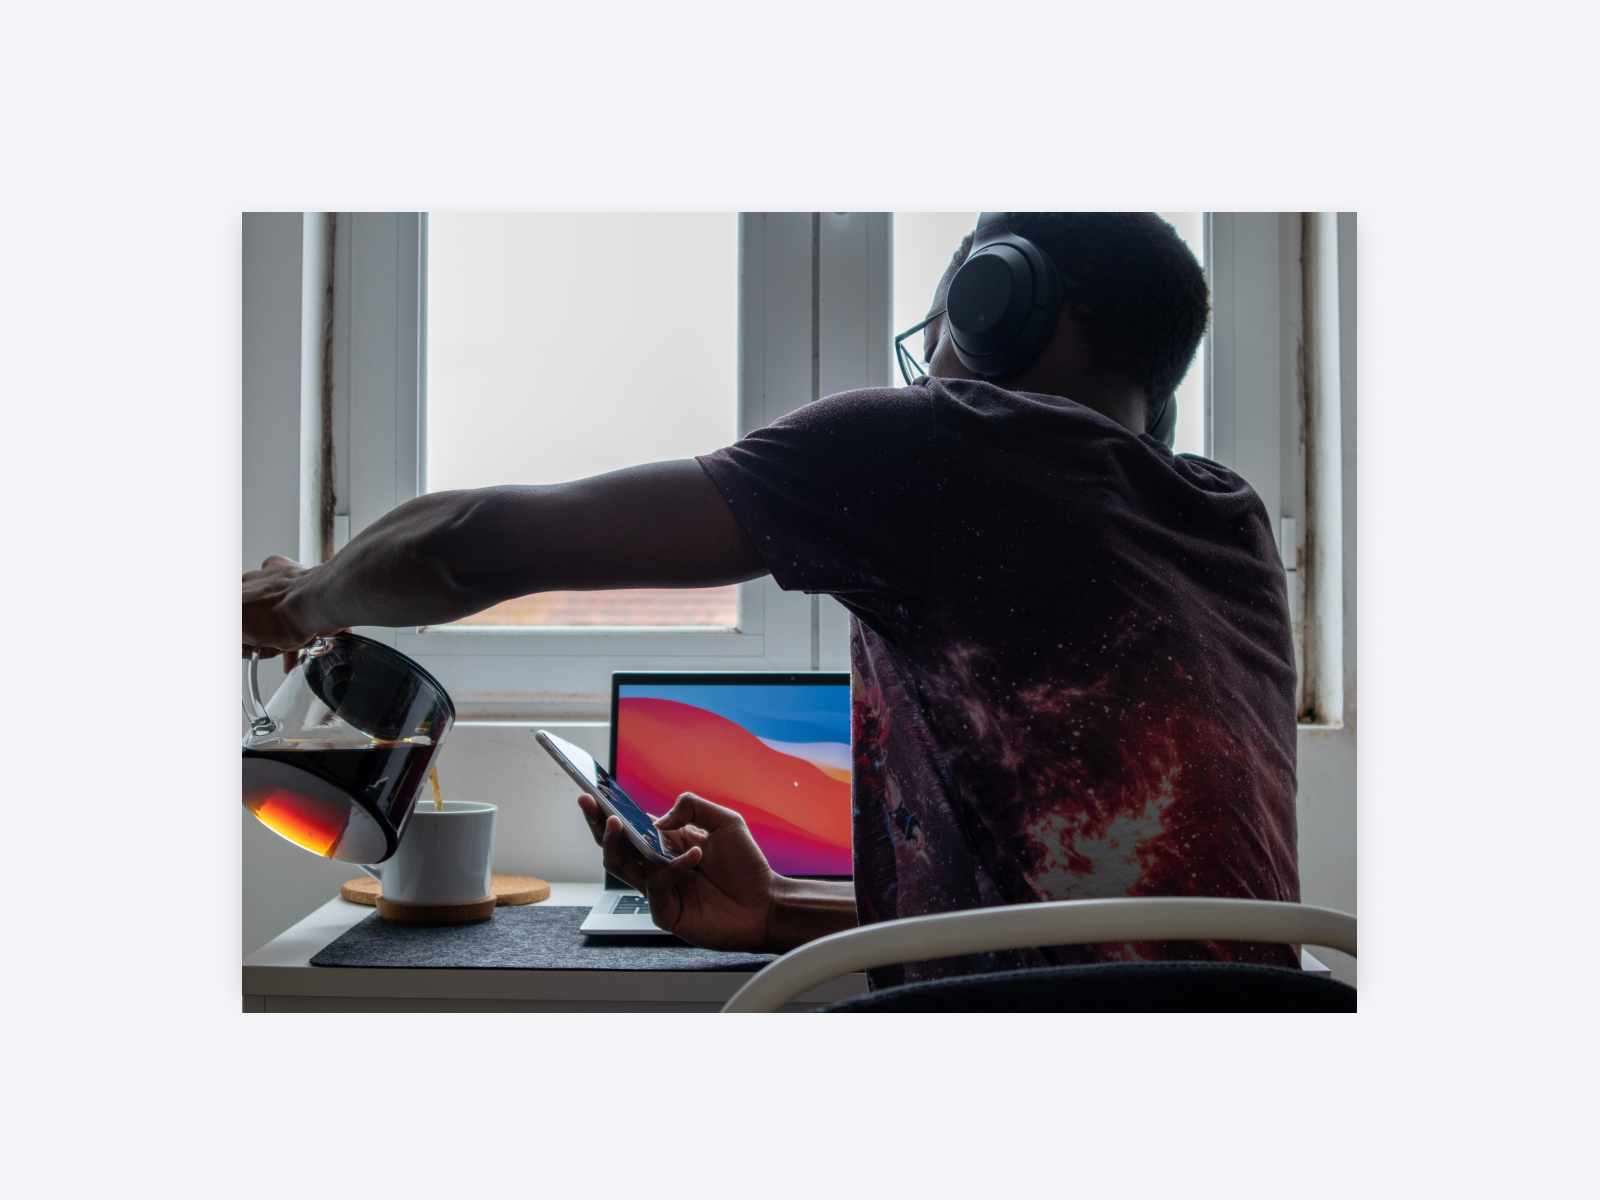 A designer pouring himself a pot of coffee, ready to continue work.